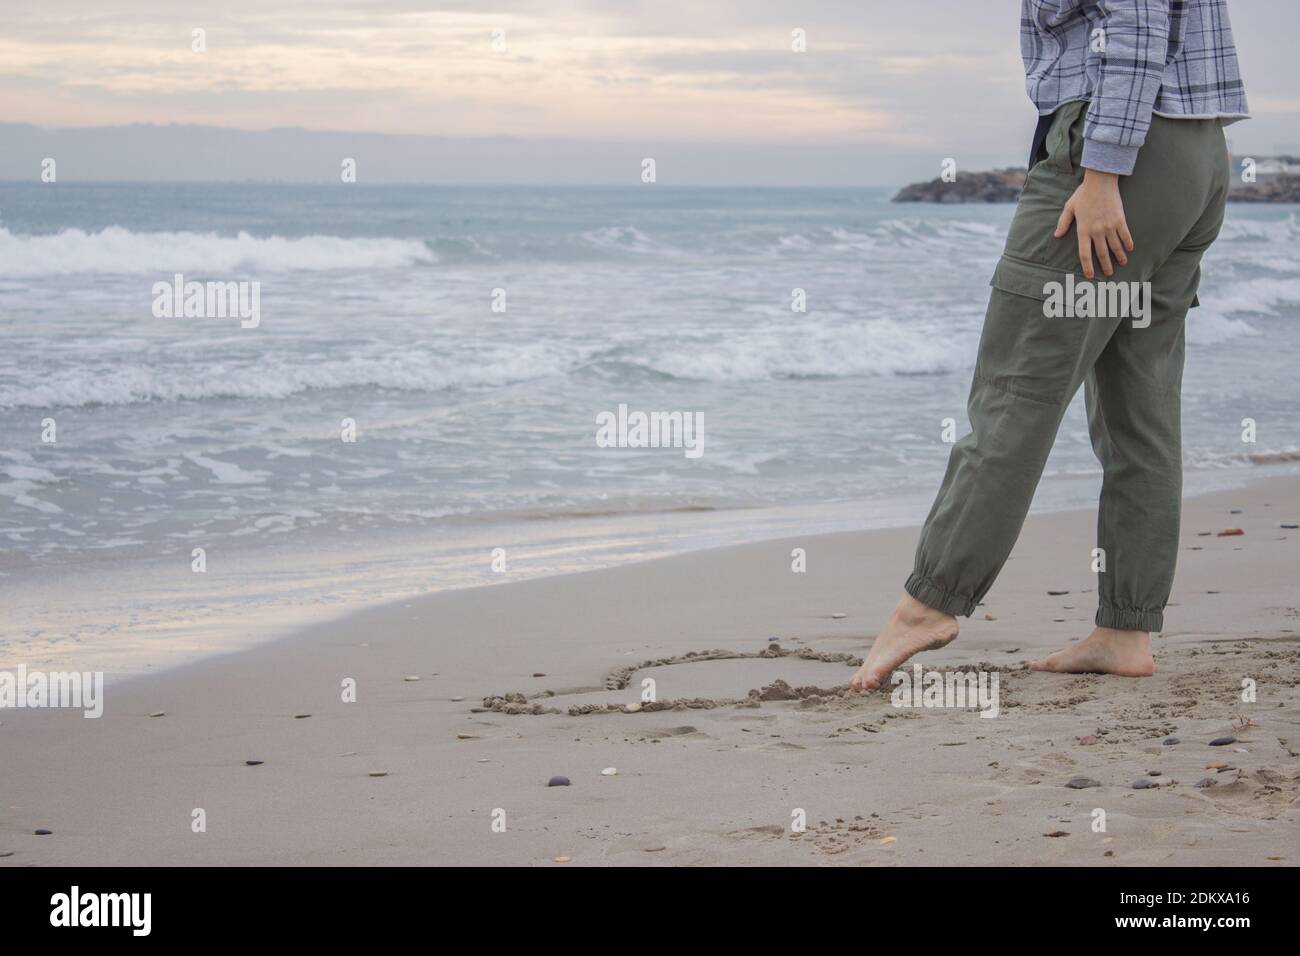 Horizontal conceptual image with an ocean background. Unrecognizable woman draws a heart on the sand with her foot on 14th February. Valentine's Day. Stock Photo